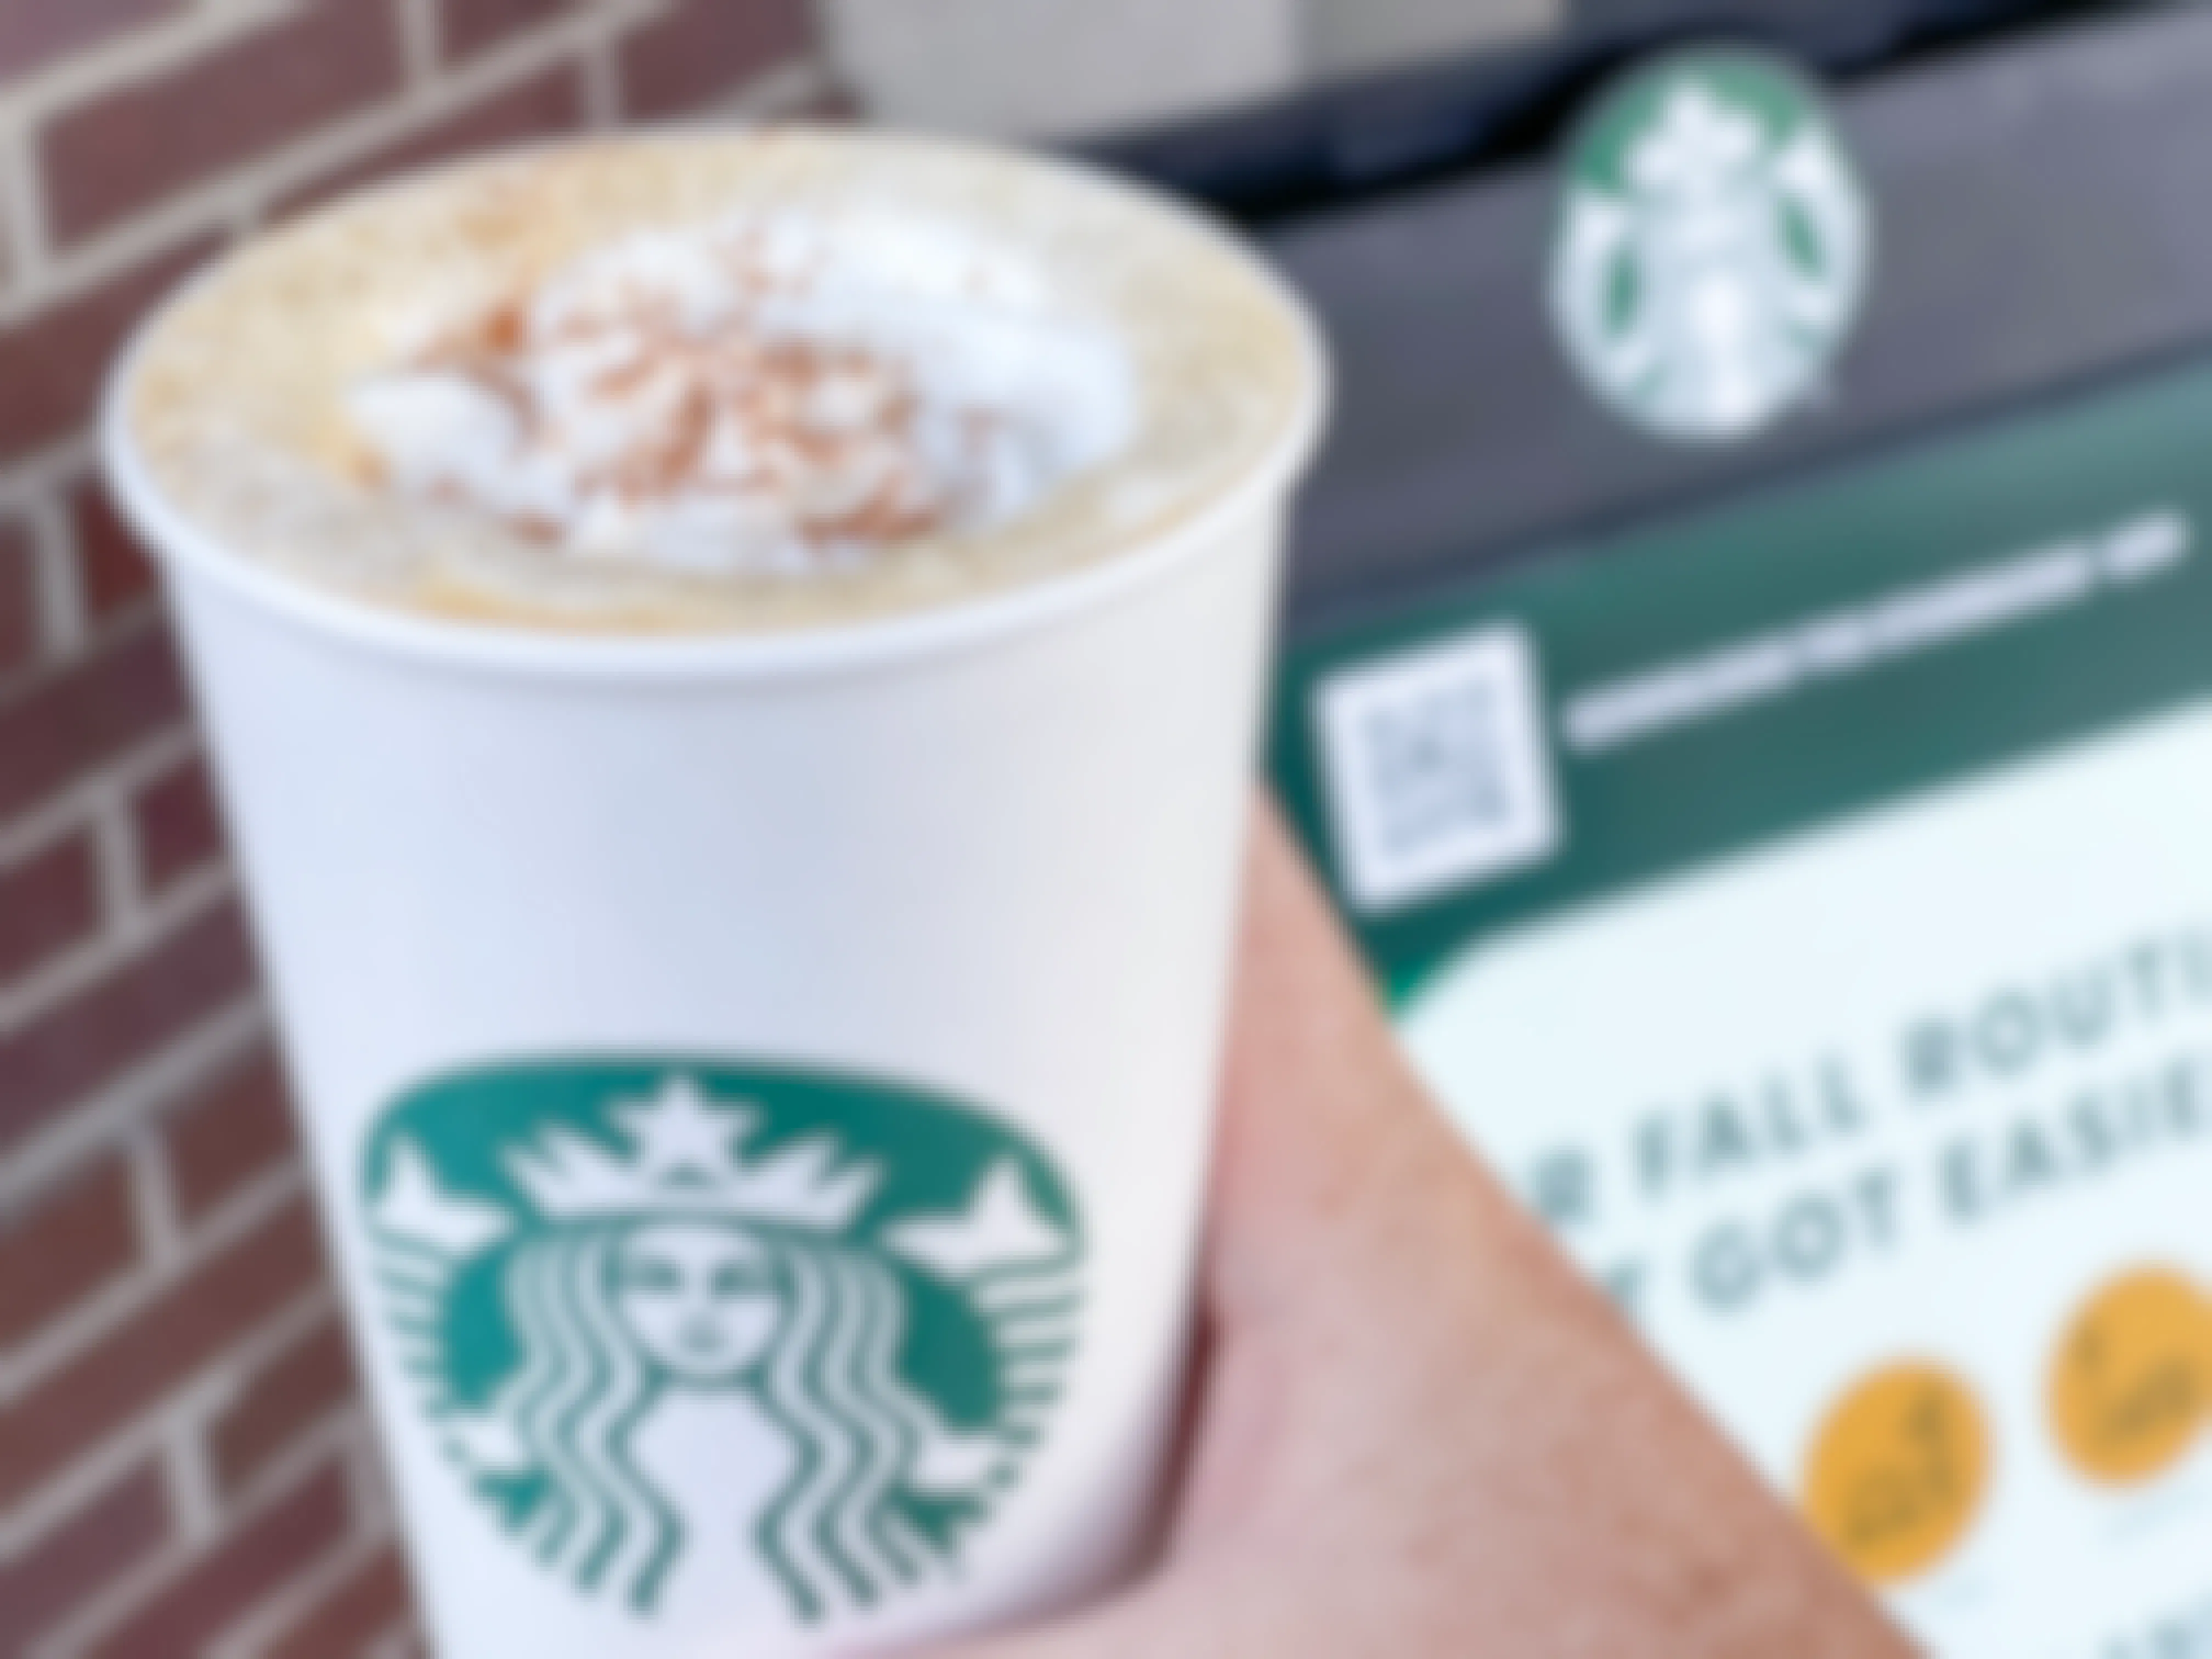 Starbucks Pumpkin Spice Latte Returns: Here's What You Need to Know